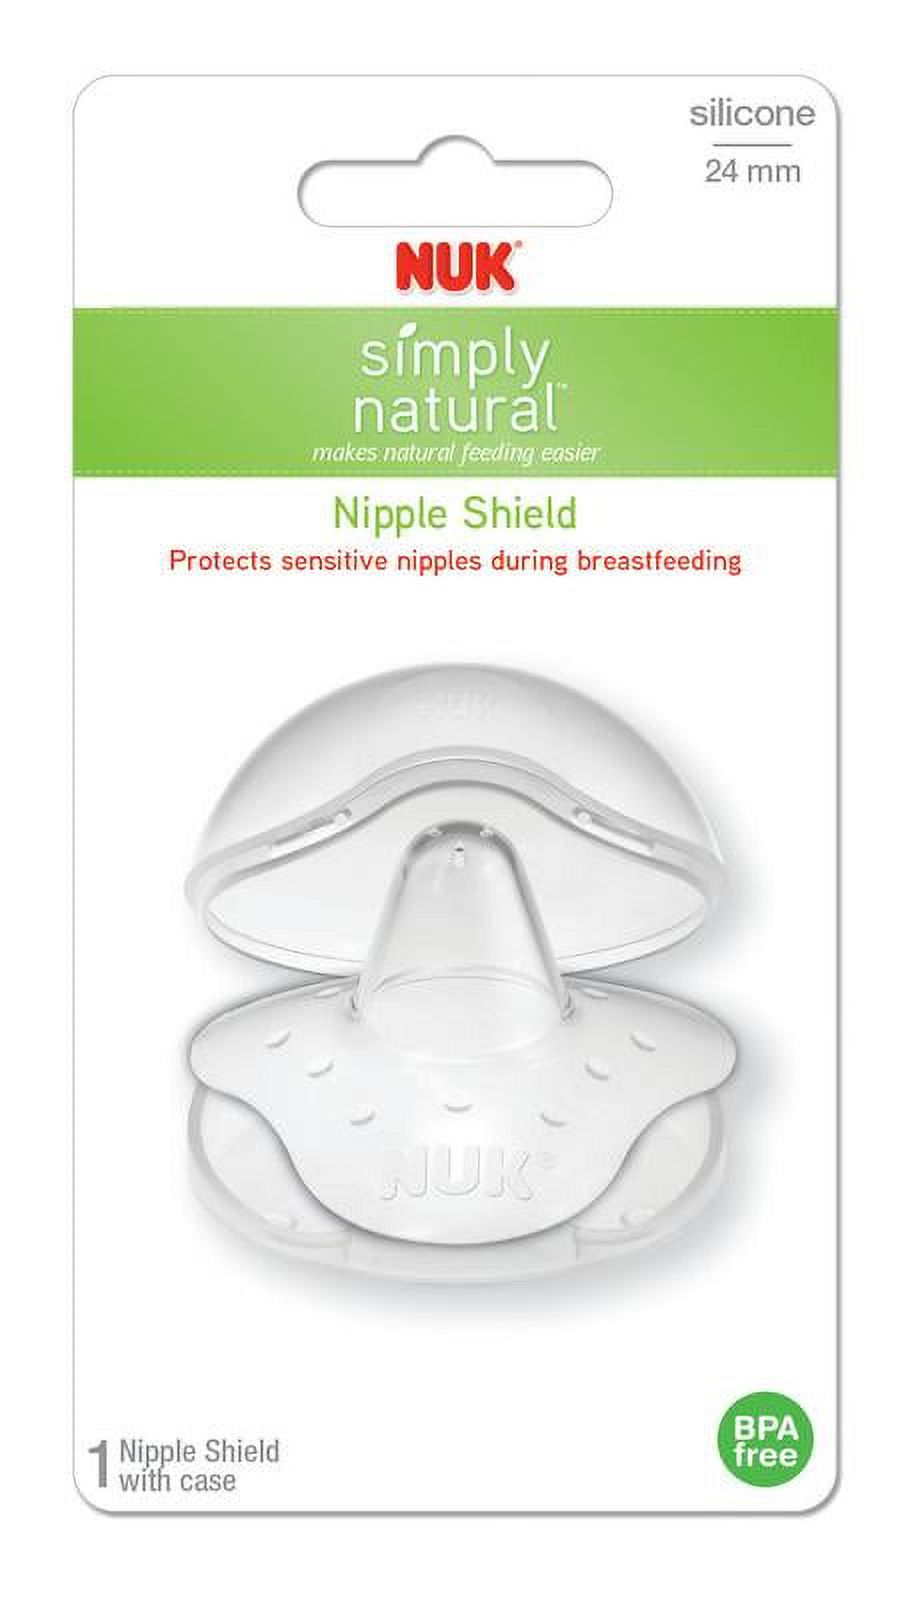 NUK Simply Natural Barely There Nipple Shield with Case, Silicone - image 2 of 2